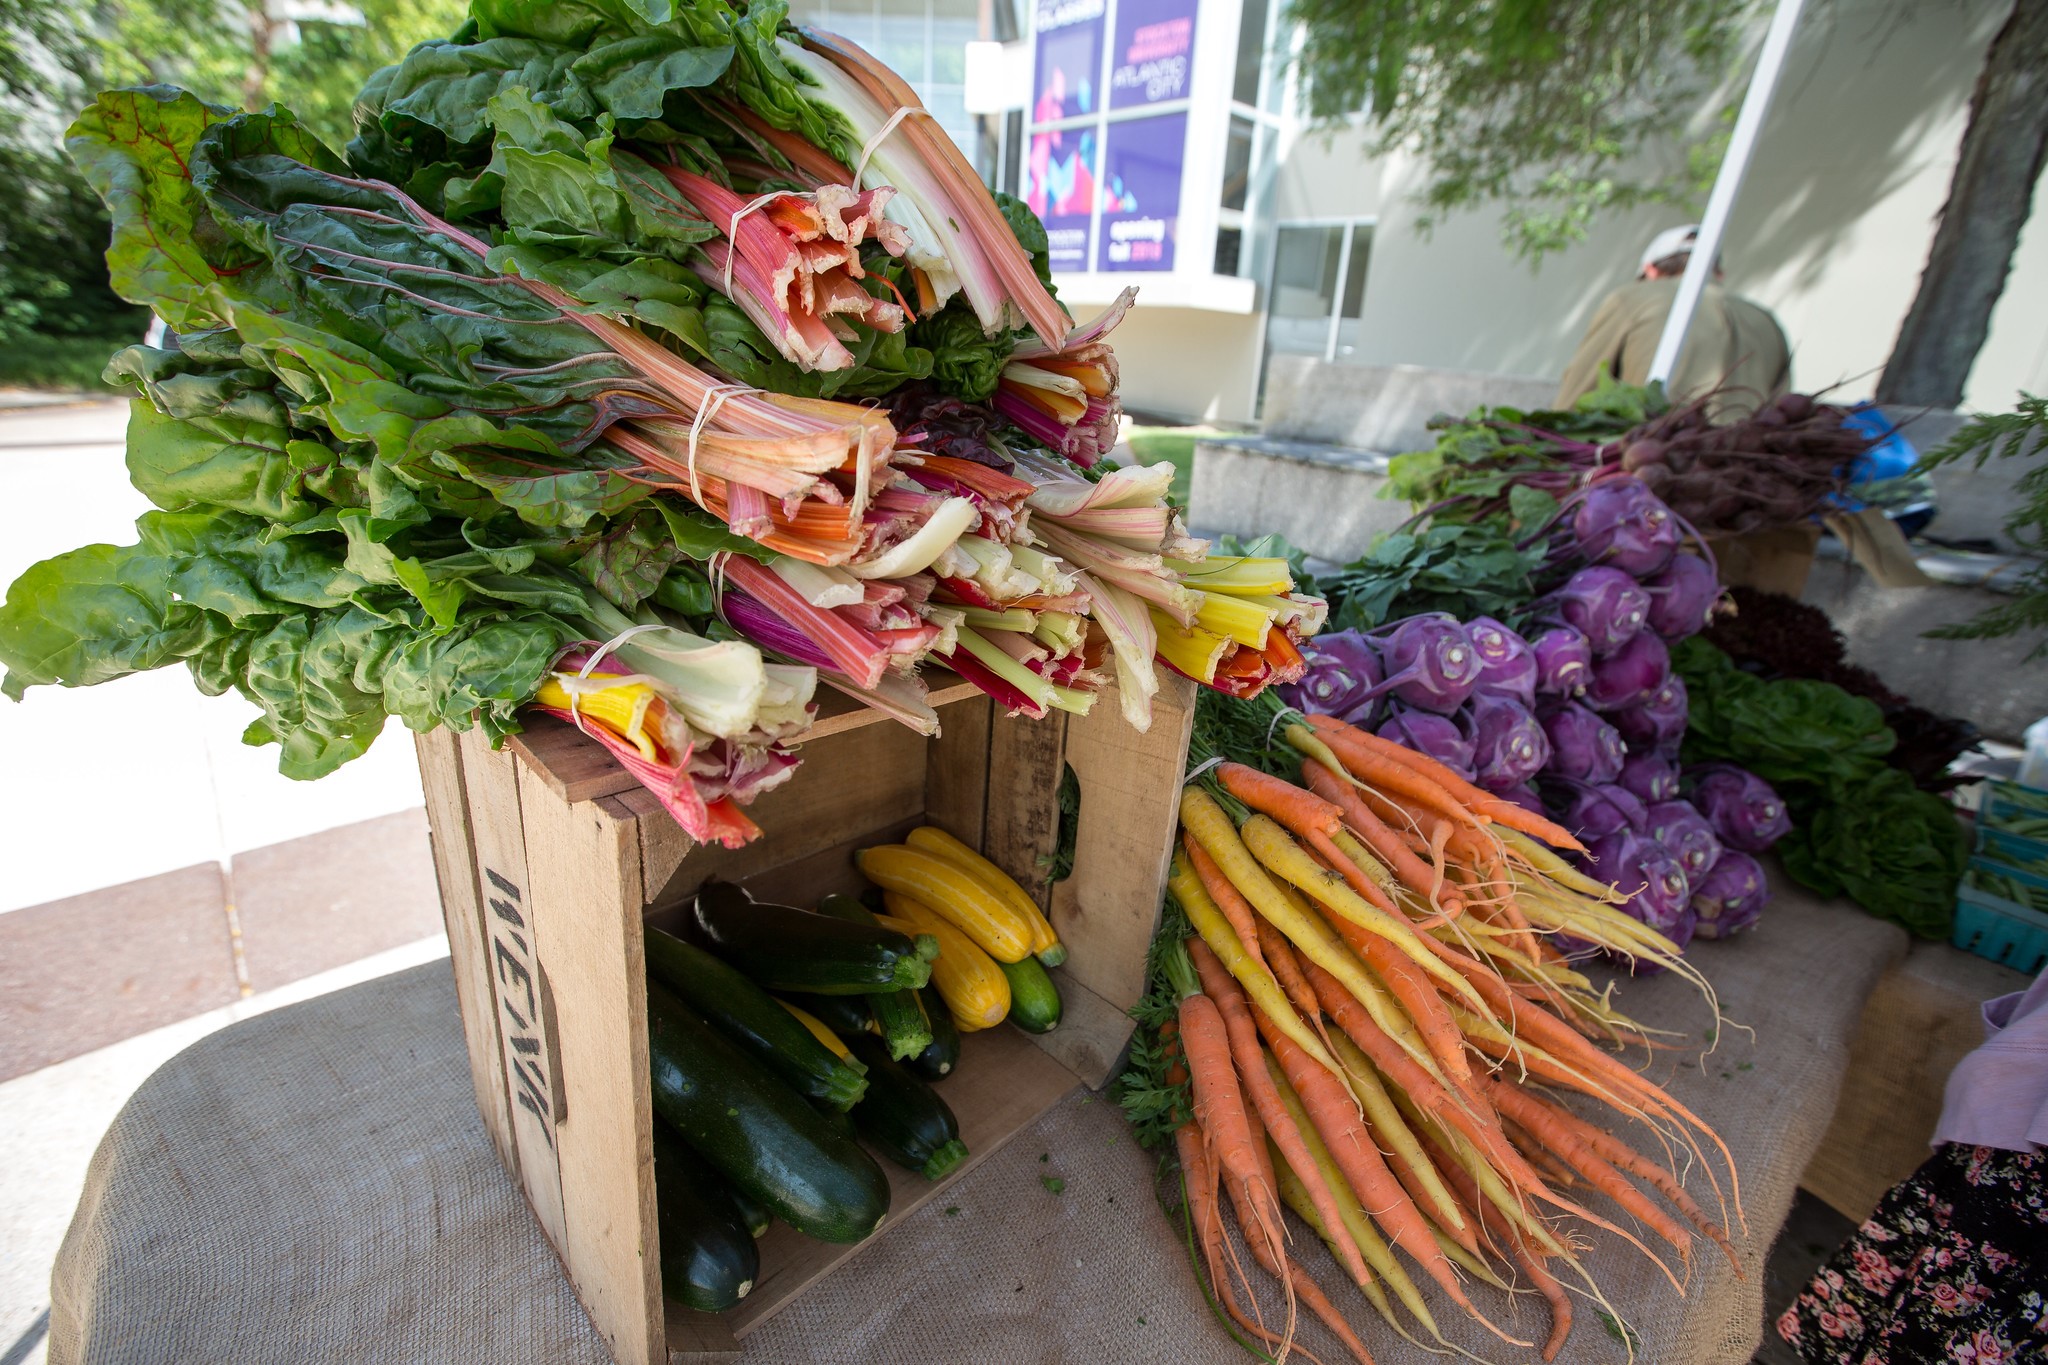 Image of vegetables grown on the sustainable farm